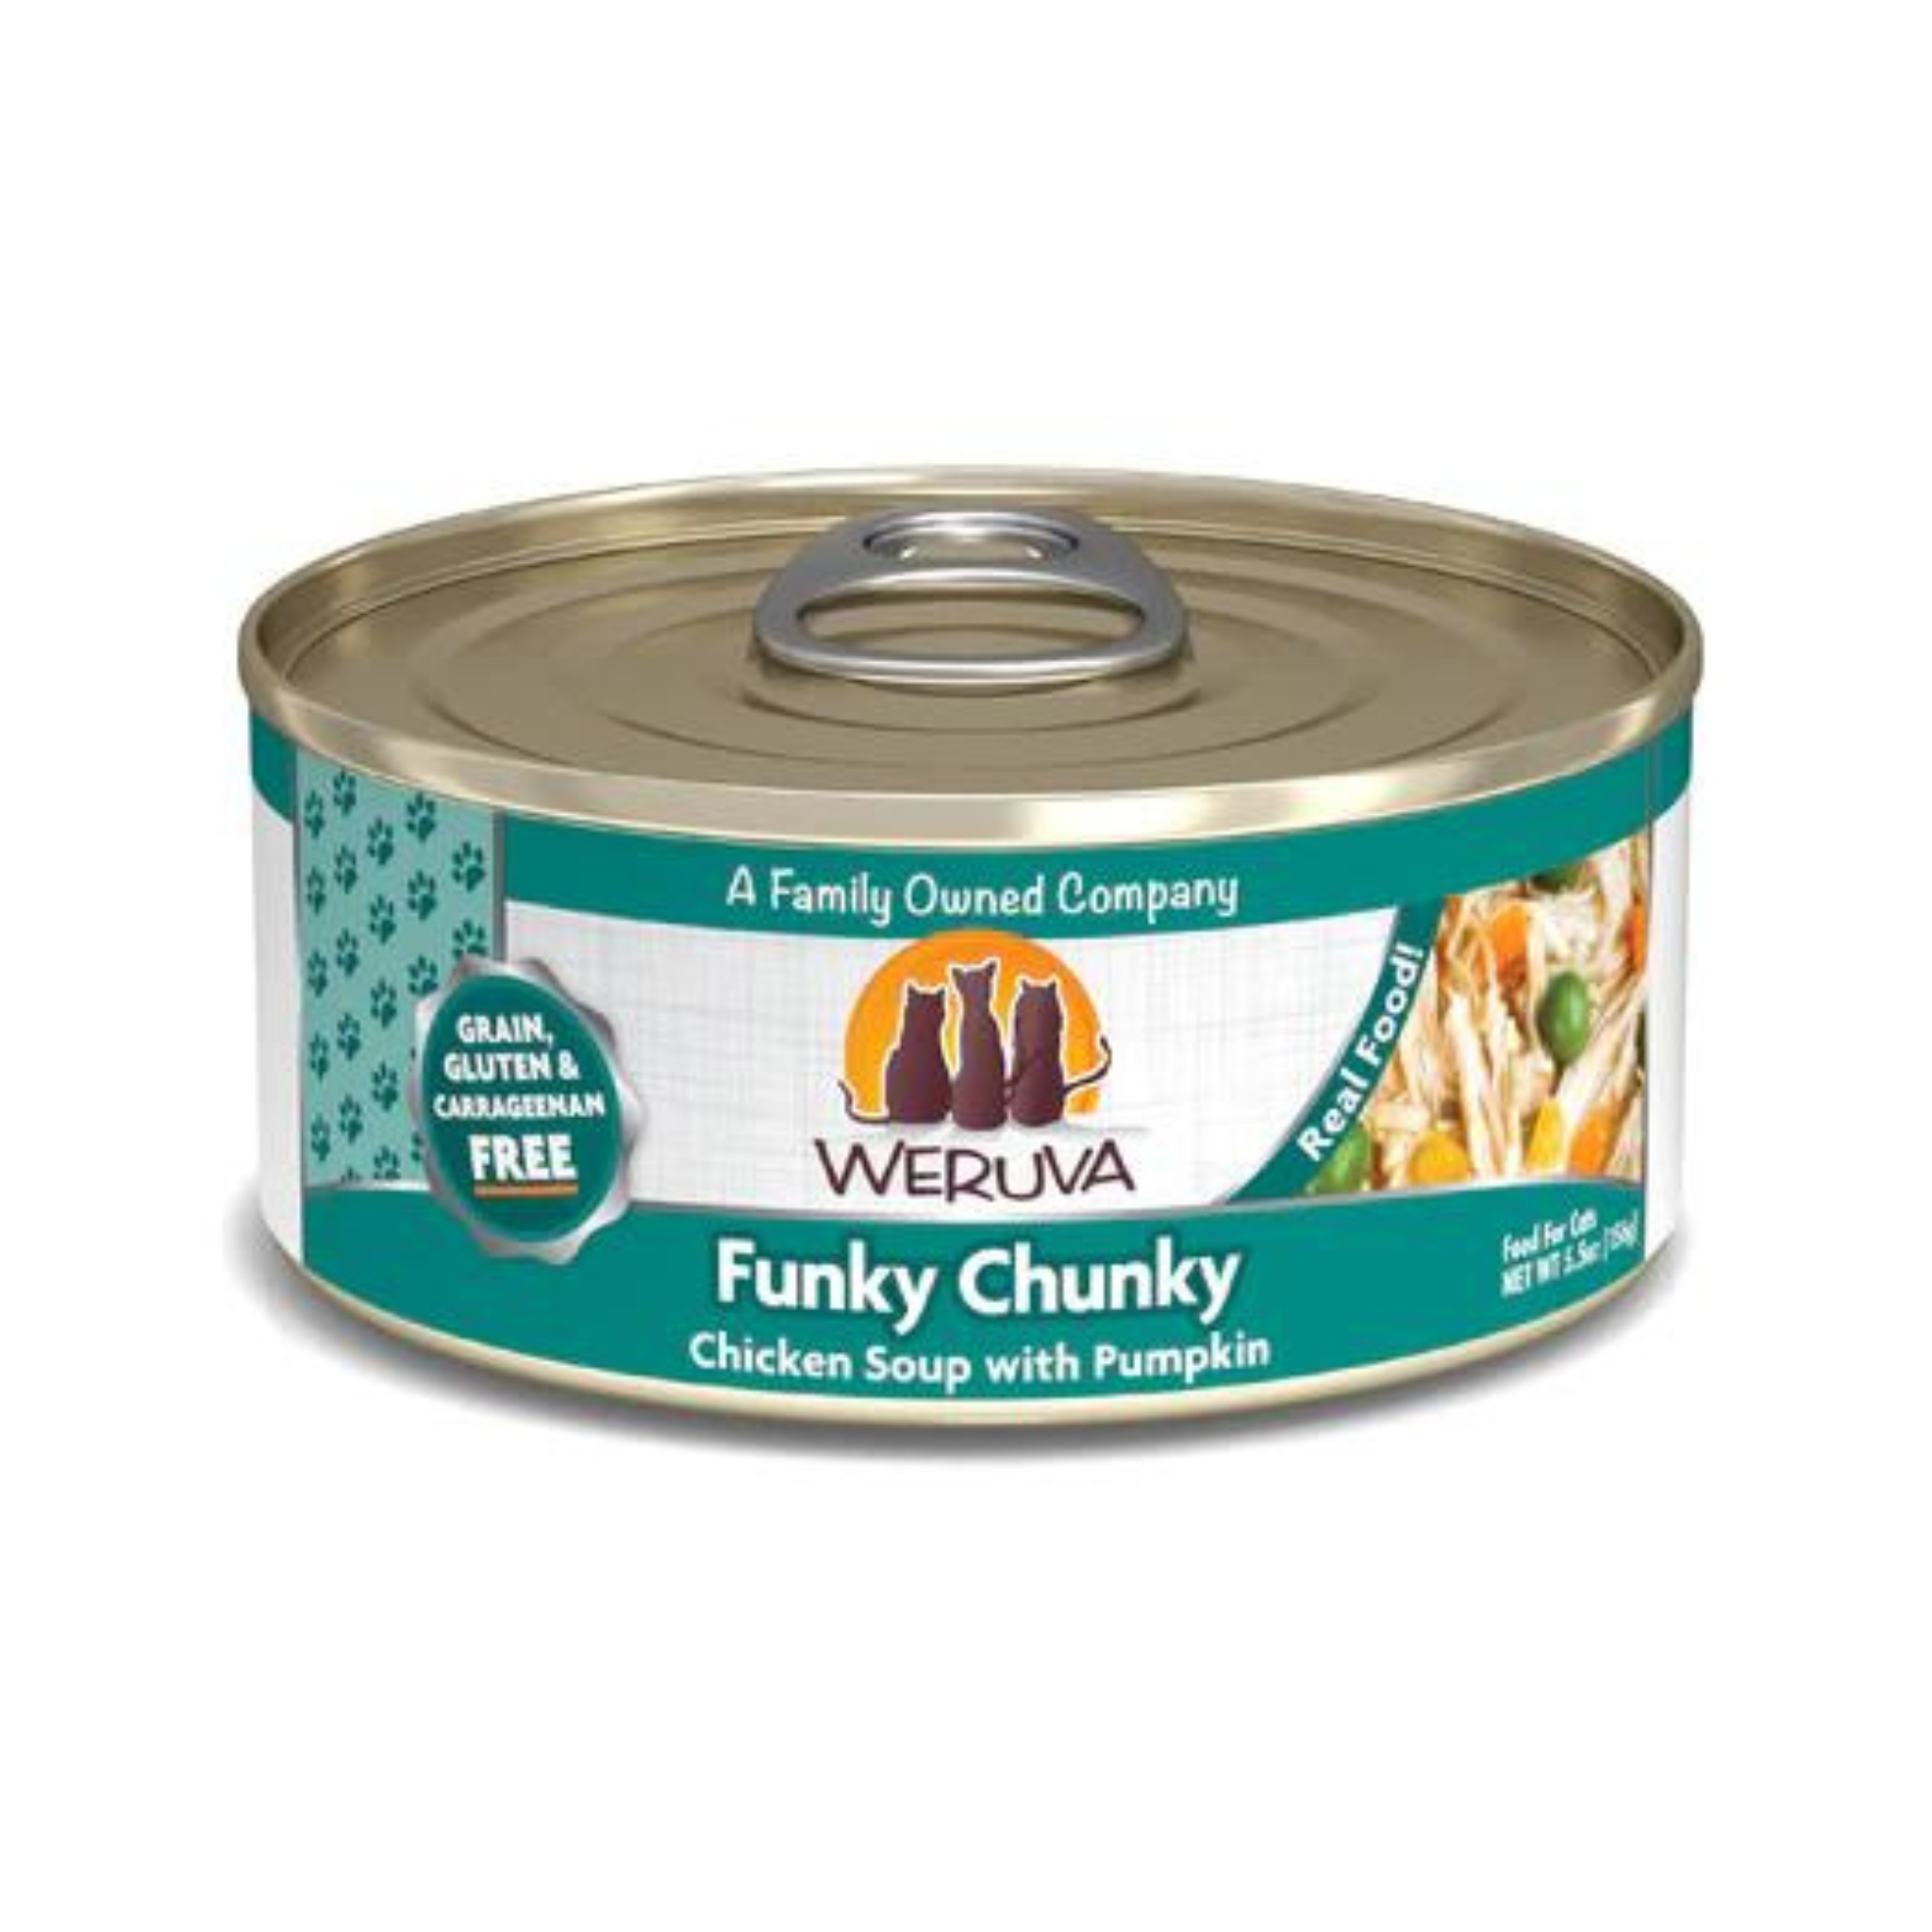 Weruva Funky Chunky Chicken Soup with Pumpkin Cat Canned